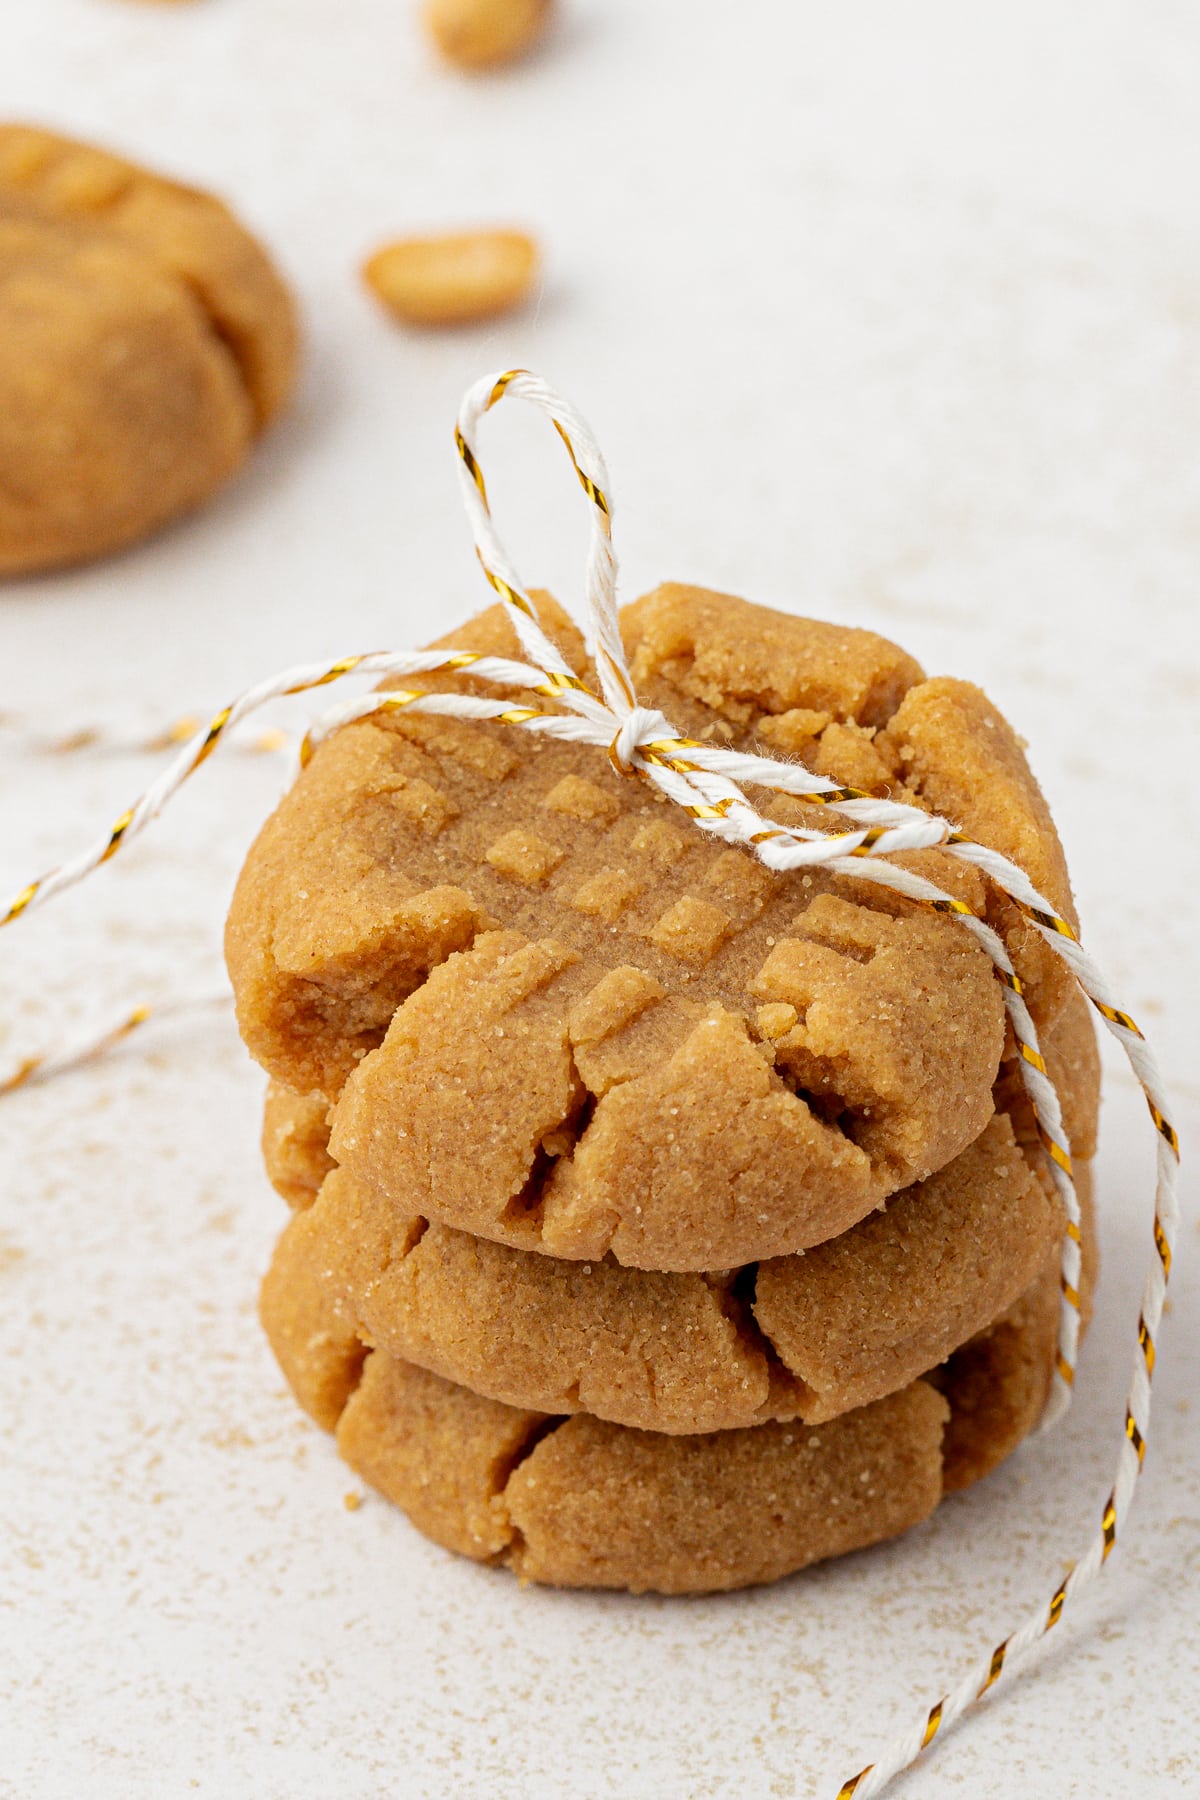 three peanut butter cookies tied in a stack with white and brown string with another cookie and peanuts sprinkled in the background